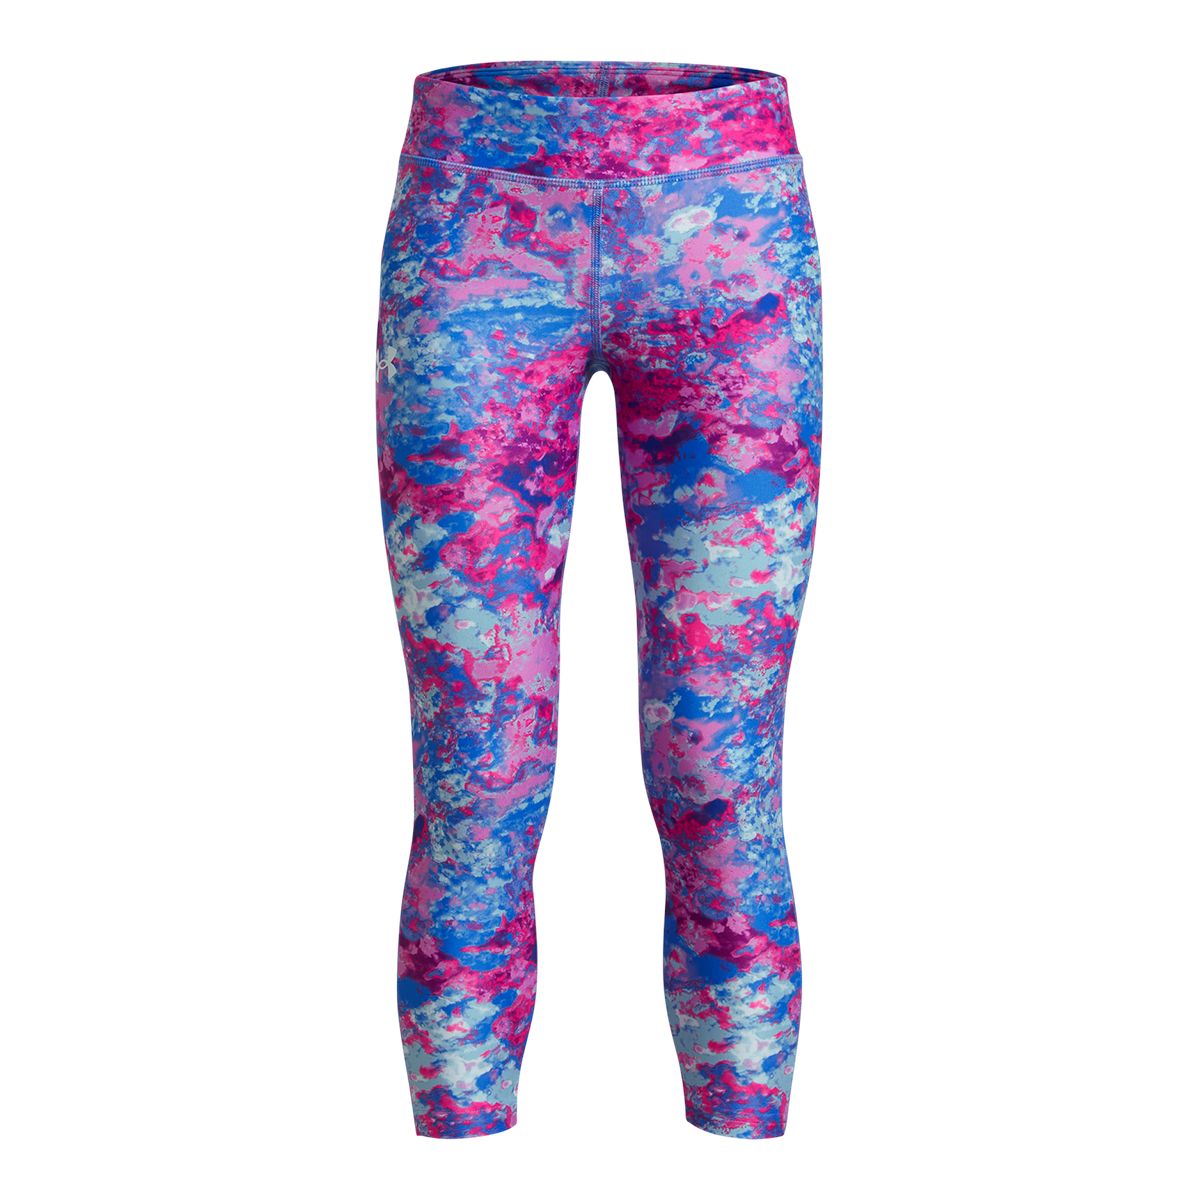 Under Armour Girls' Printed Ankle Crop Pants